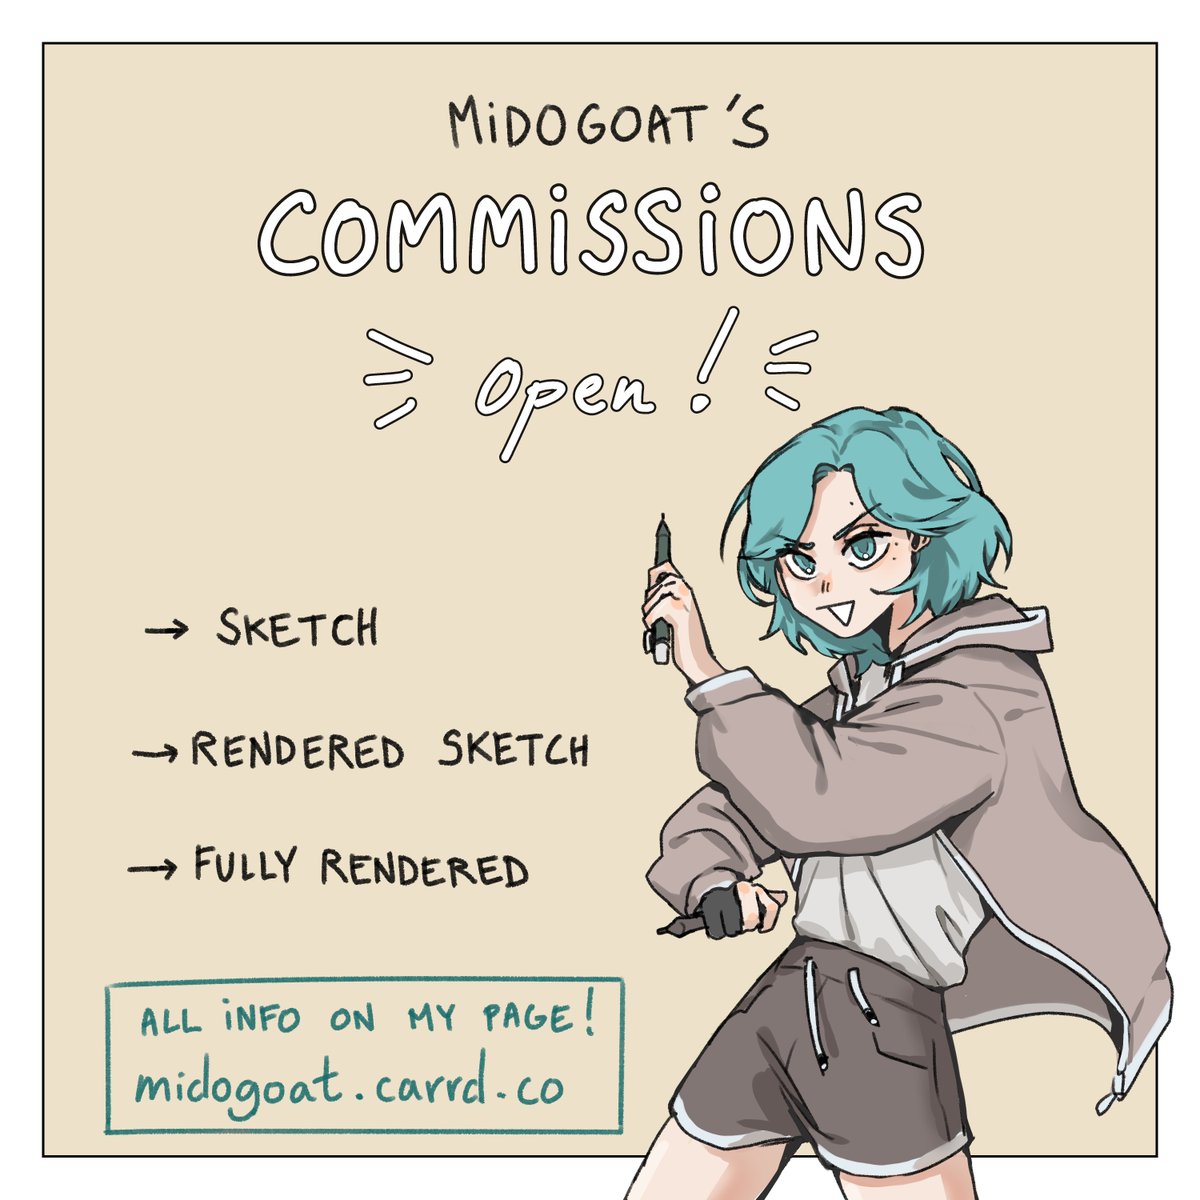 I'm opening commissions !  https://t.co/OX3GV5DJo2 